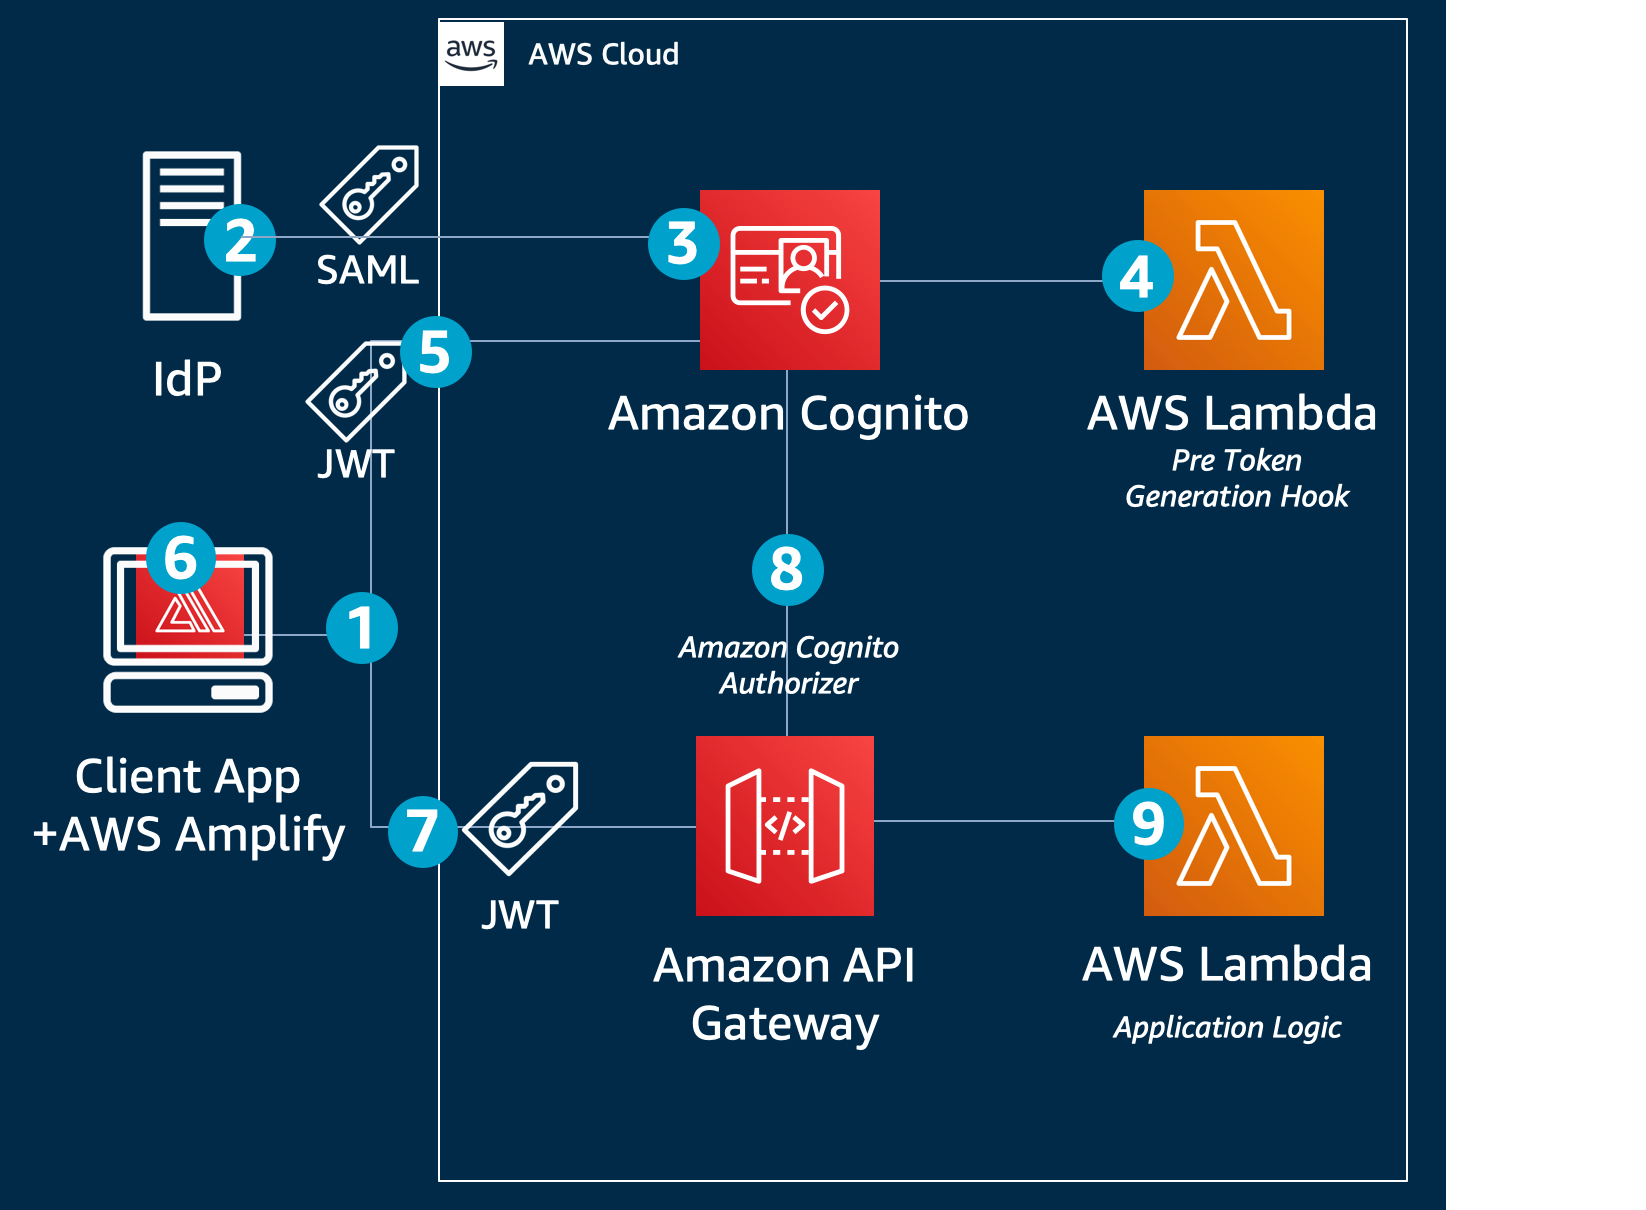 Role-based access control using Amazon Cognito and an external identity provider